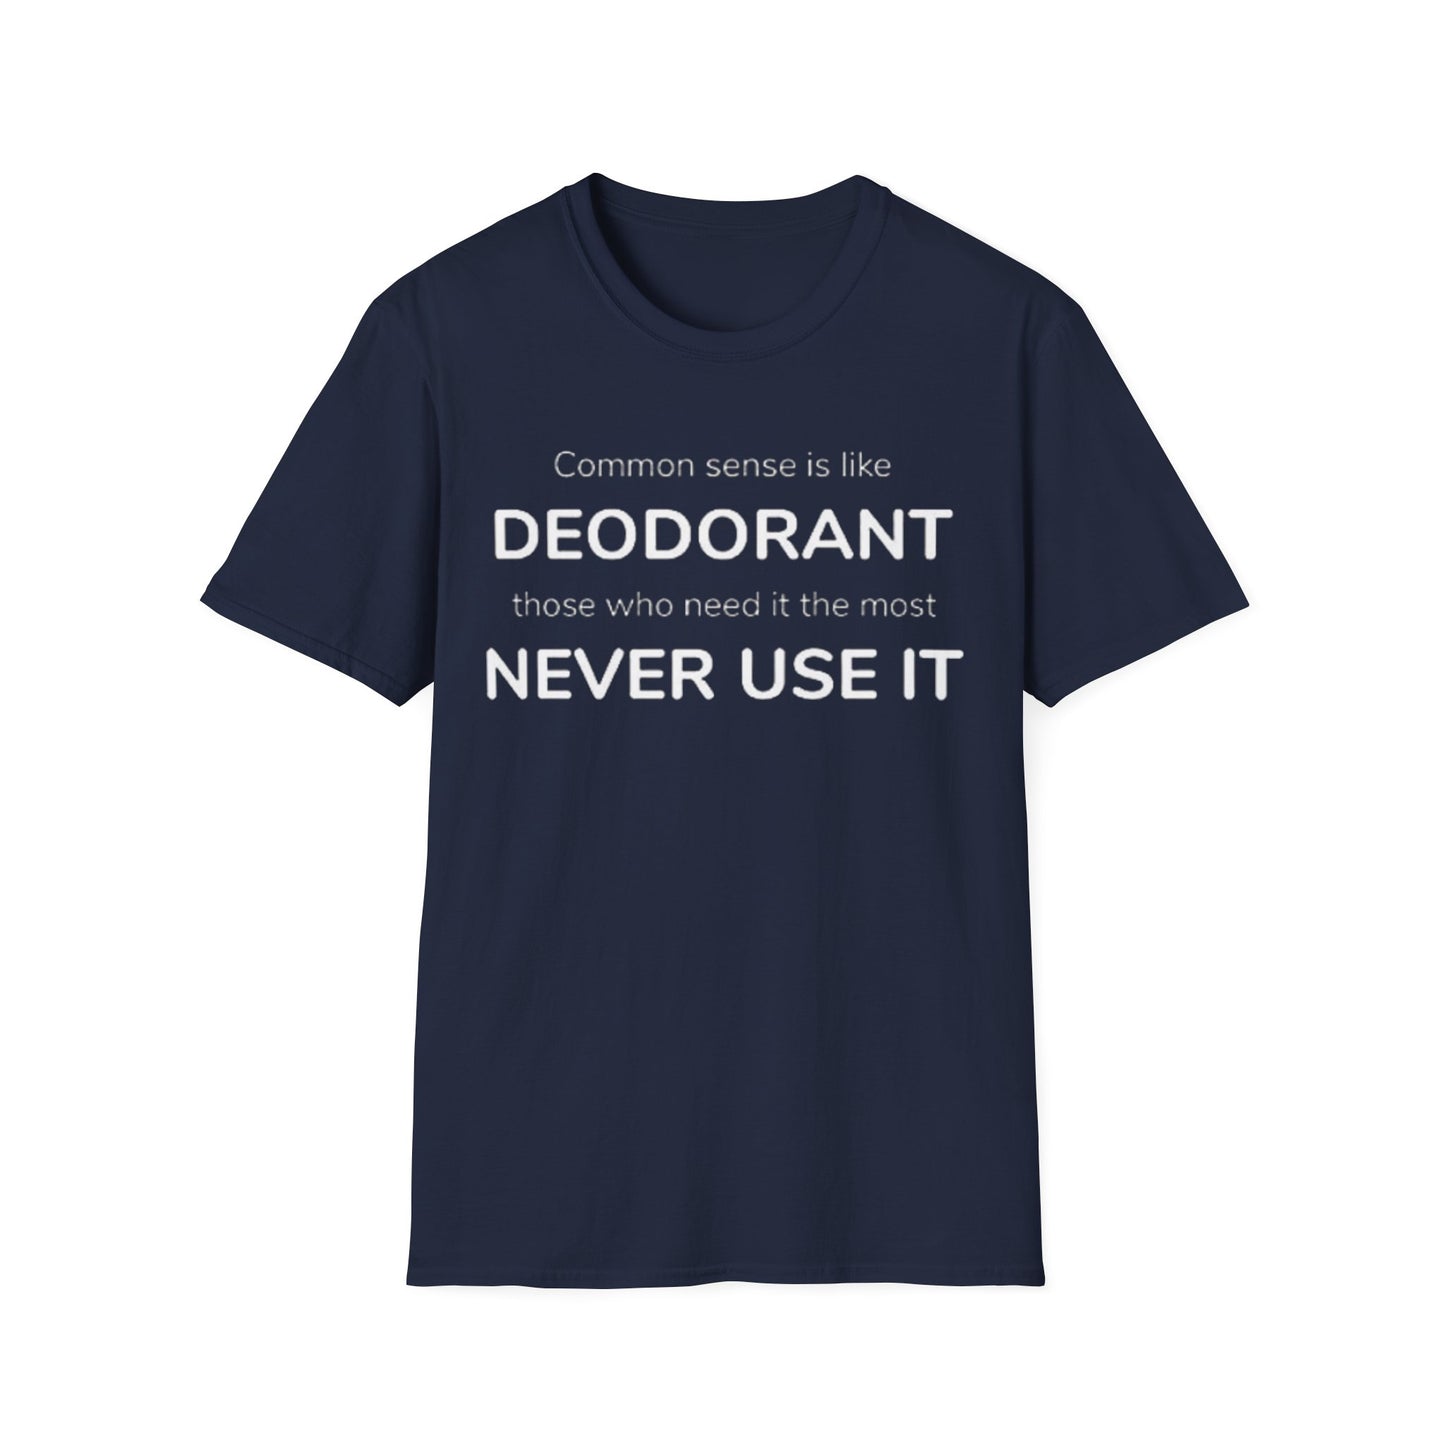 Common sense is like deodorant those who need it the most never use it - Unisex Softstyle T-Shirt